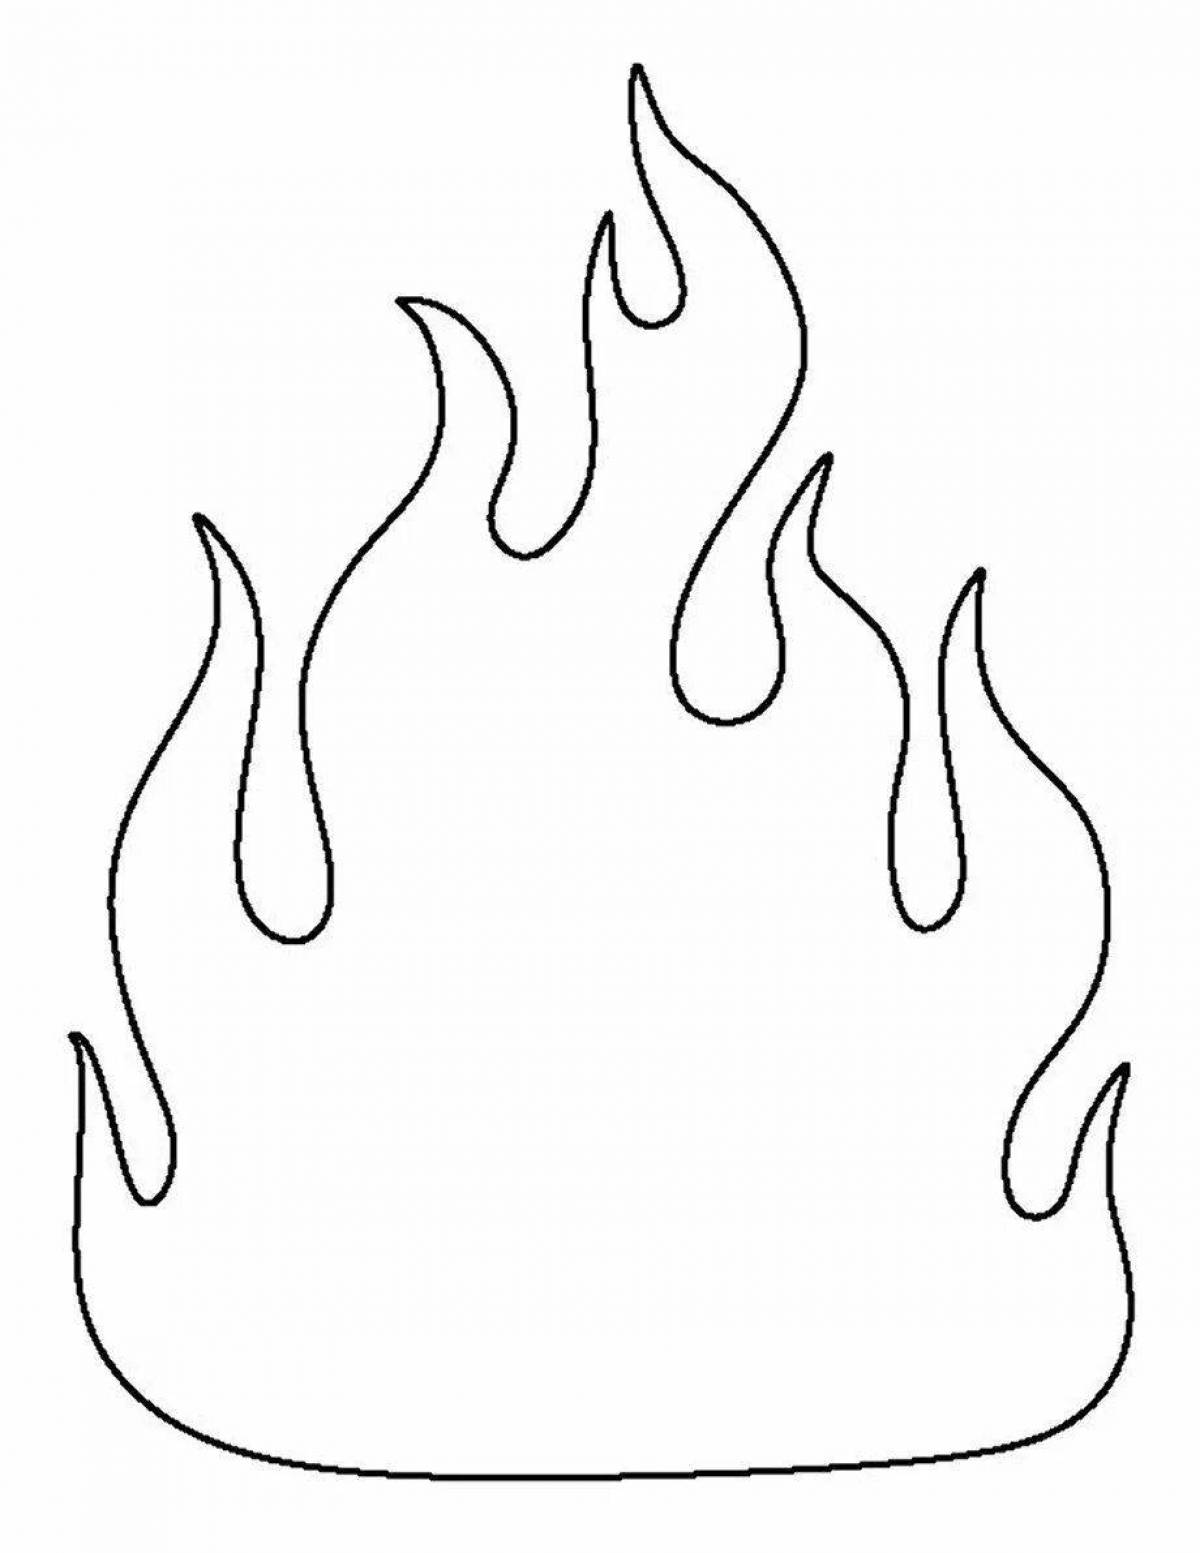 Dazzling flame coloring pages